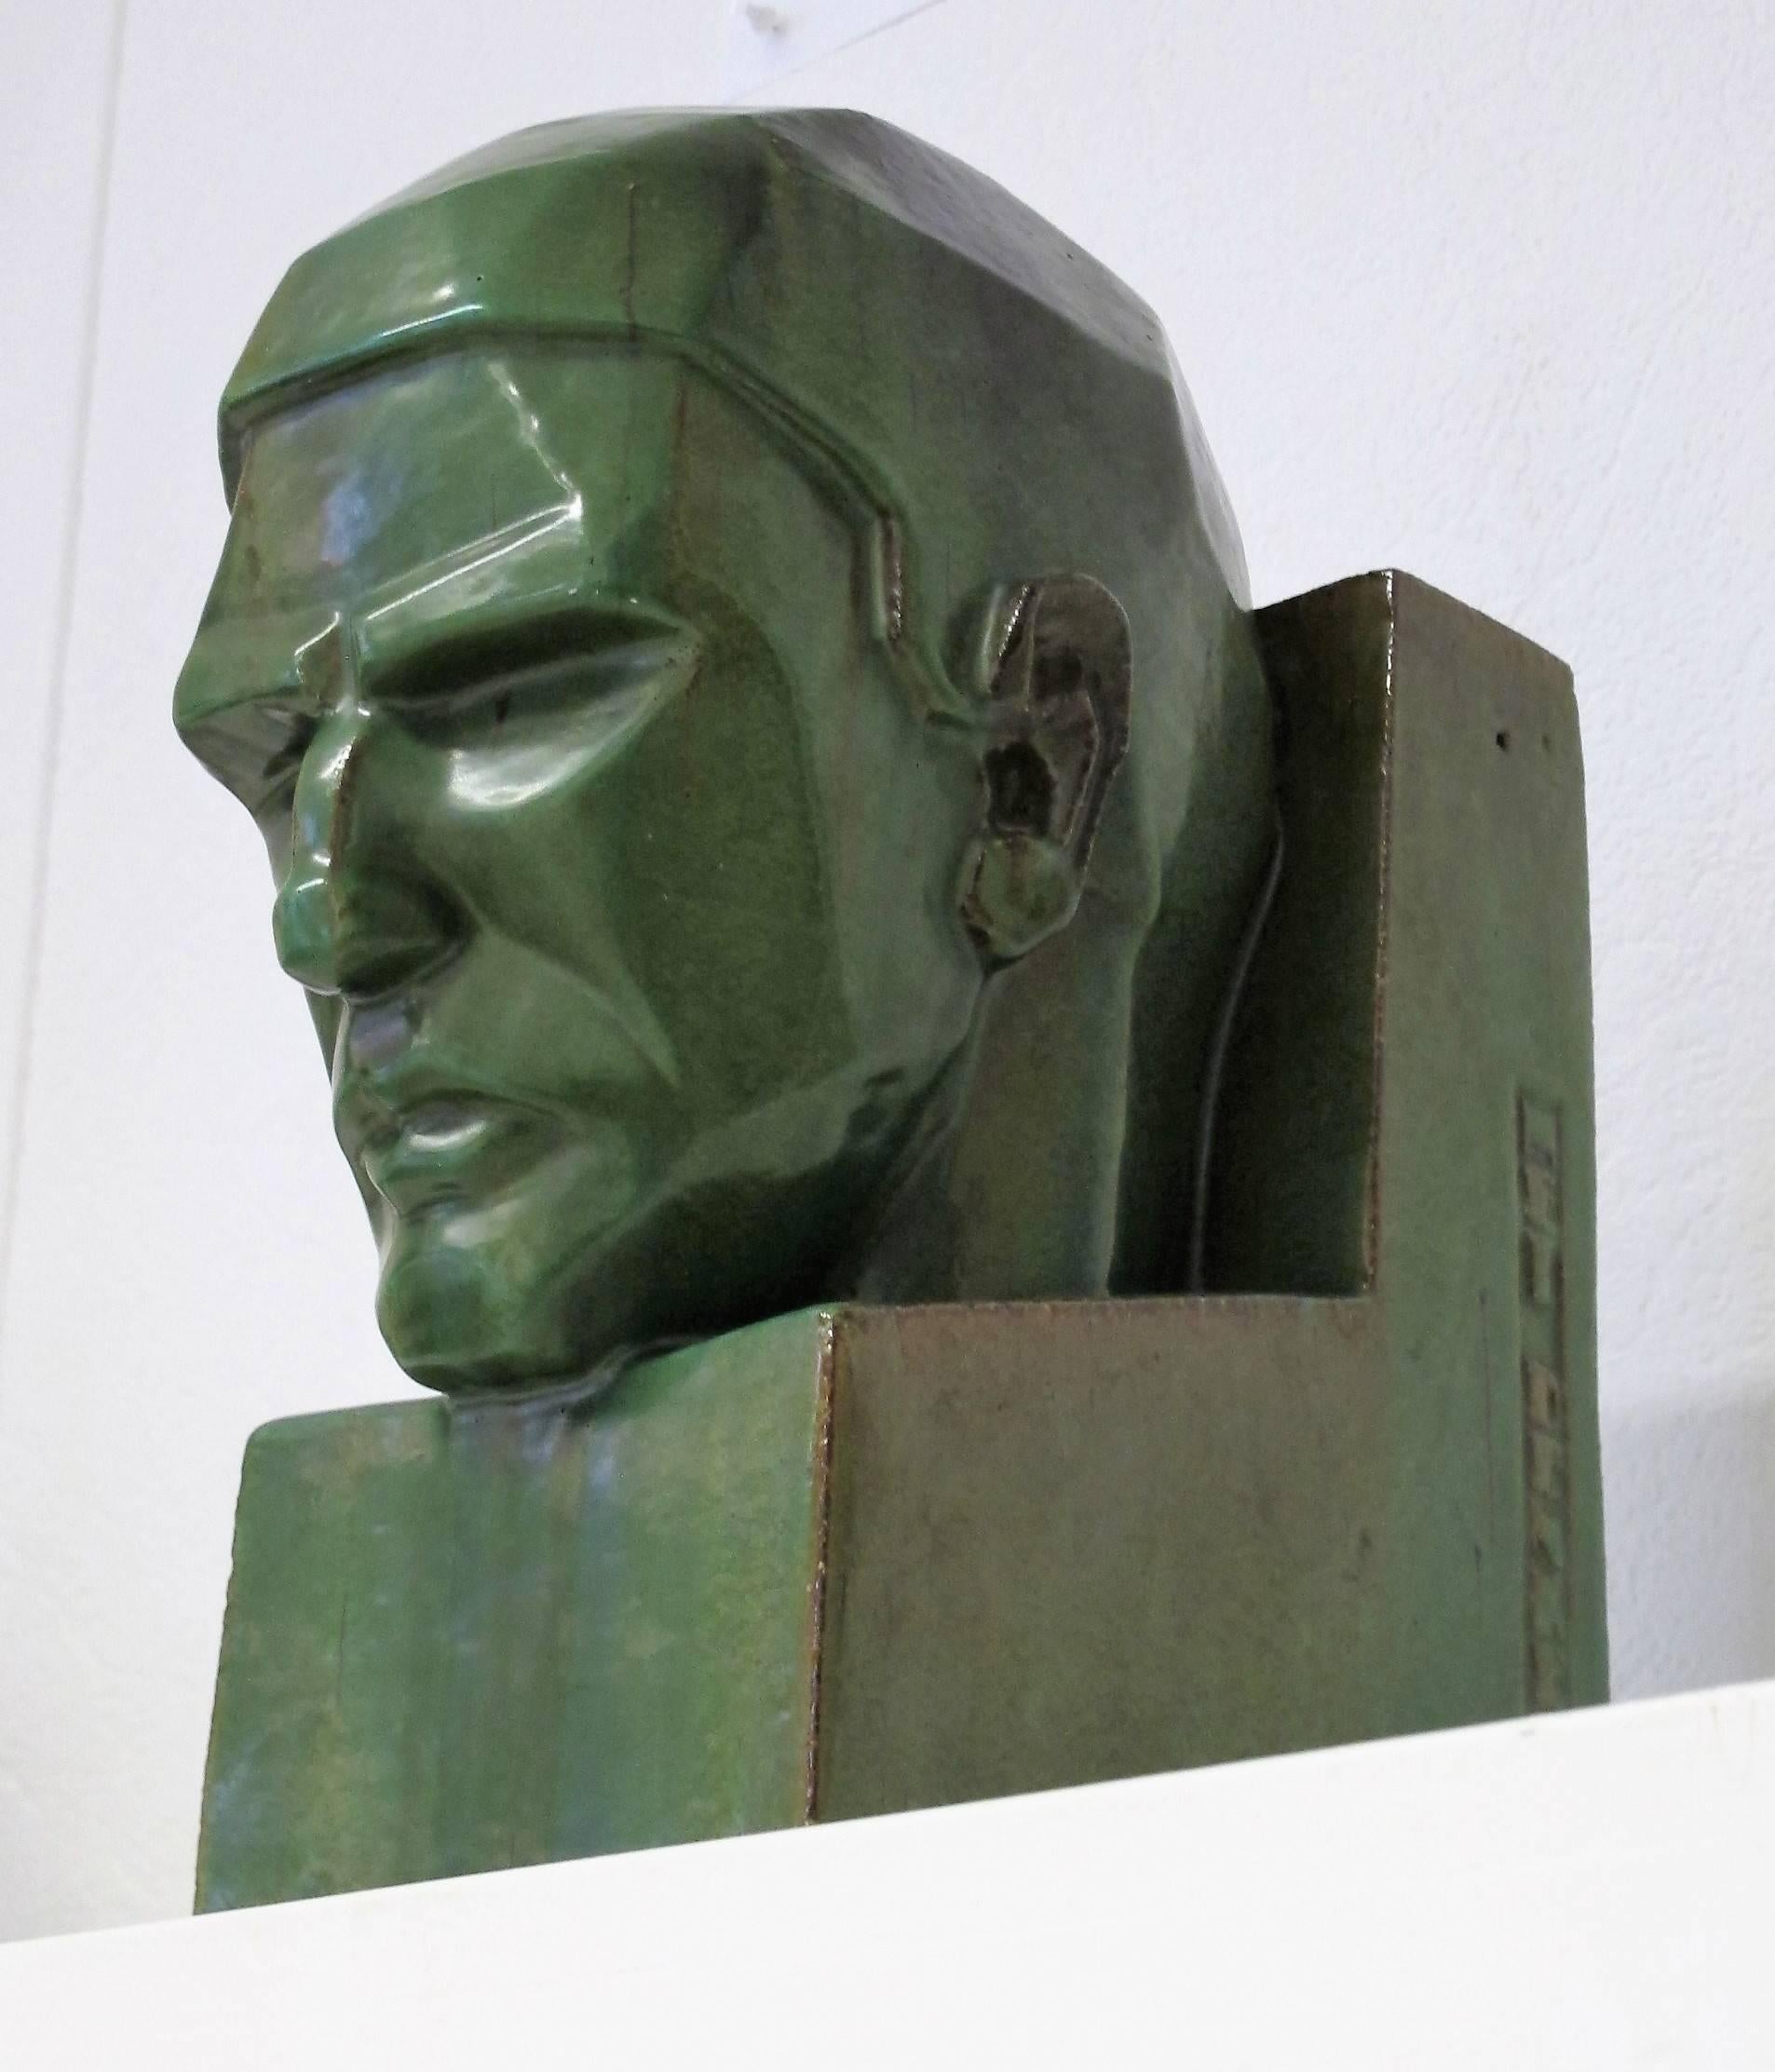 Beautiful deep green glazed earthenware sculpture depicting 'Het Denken' ('Thinking'), designed and executed by Dutch ceramist and sculptor W. C. Brouwer (1877-1933). Brouwer worked as an architectural ceramist as well, for instance for the